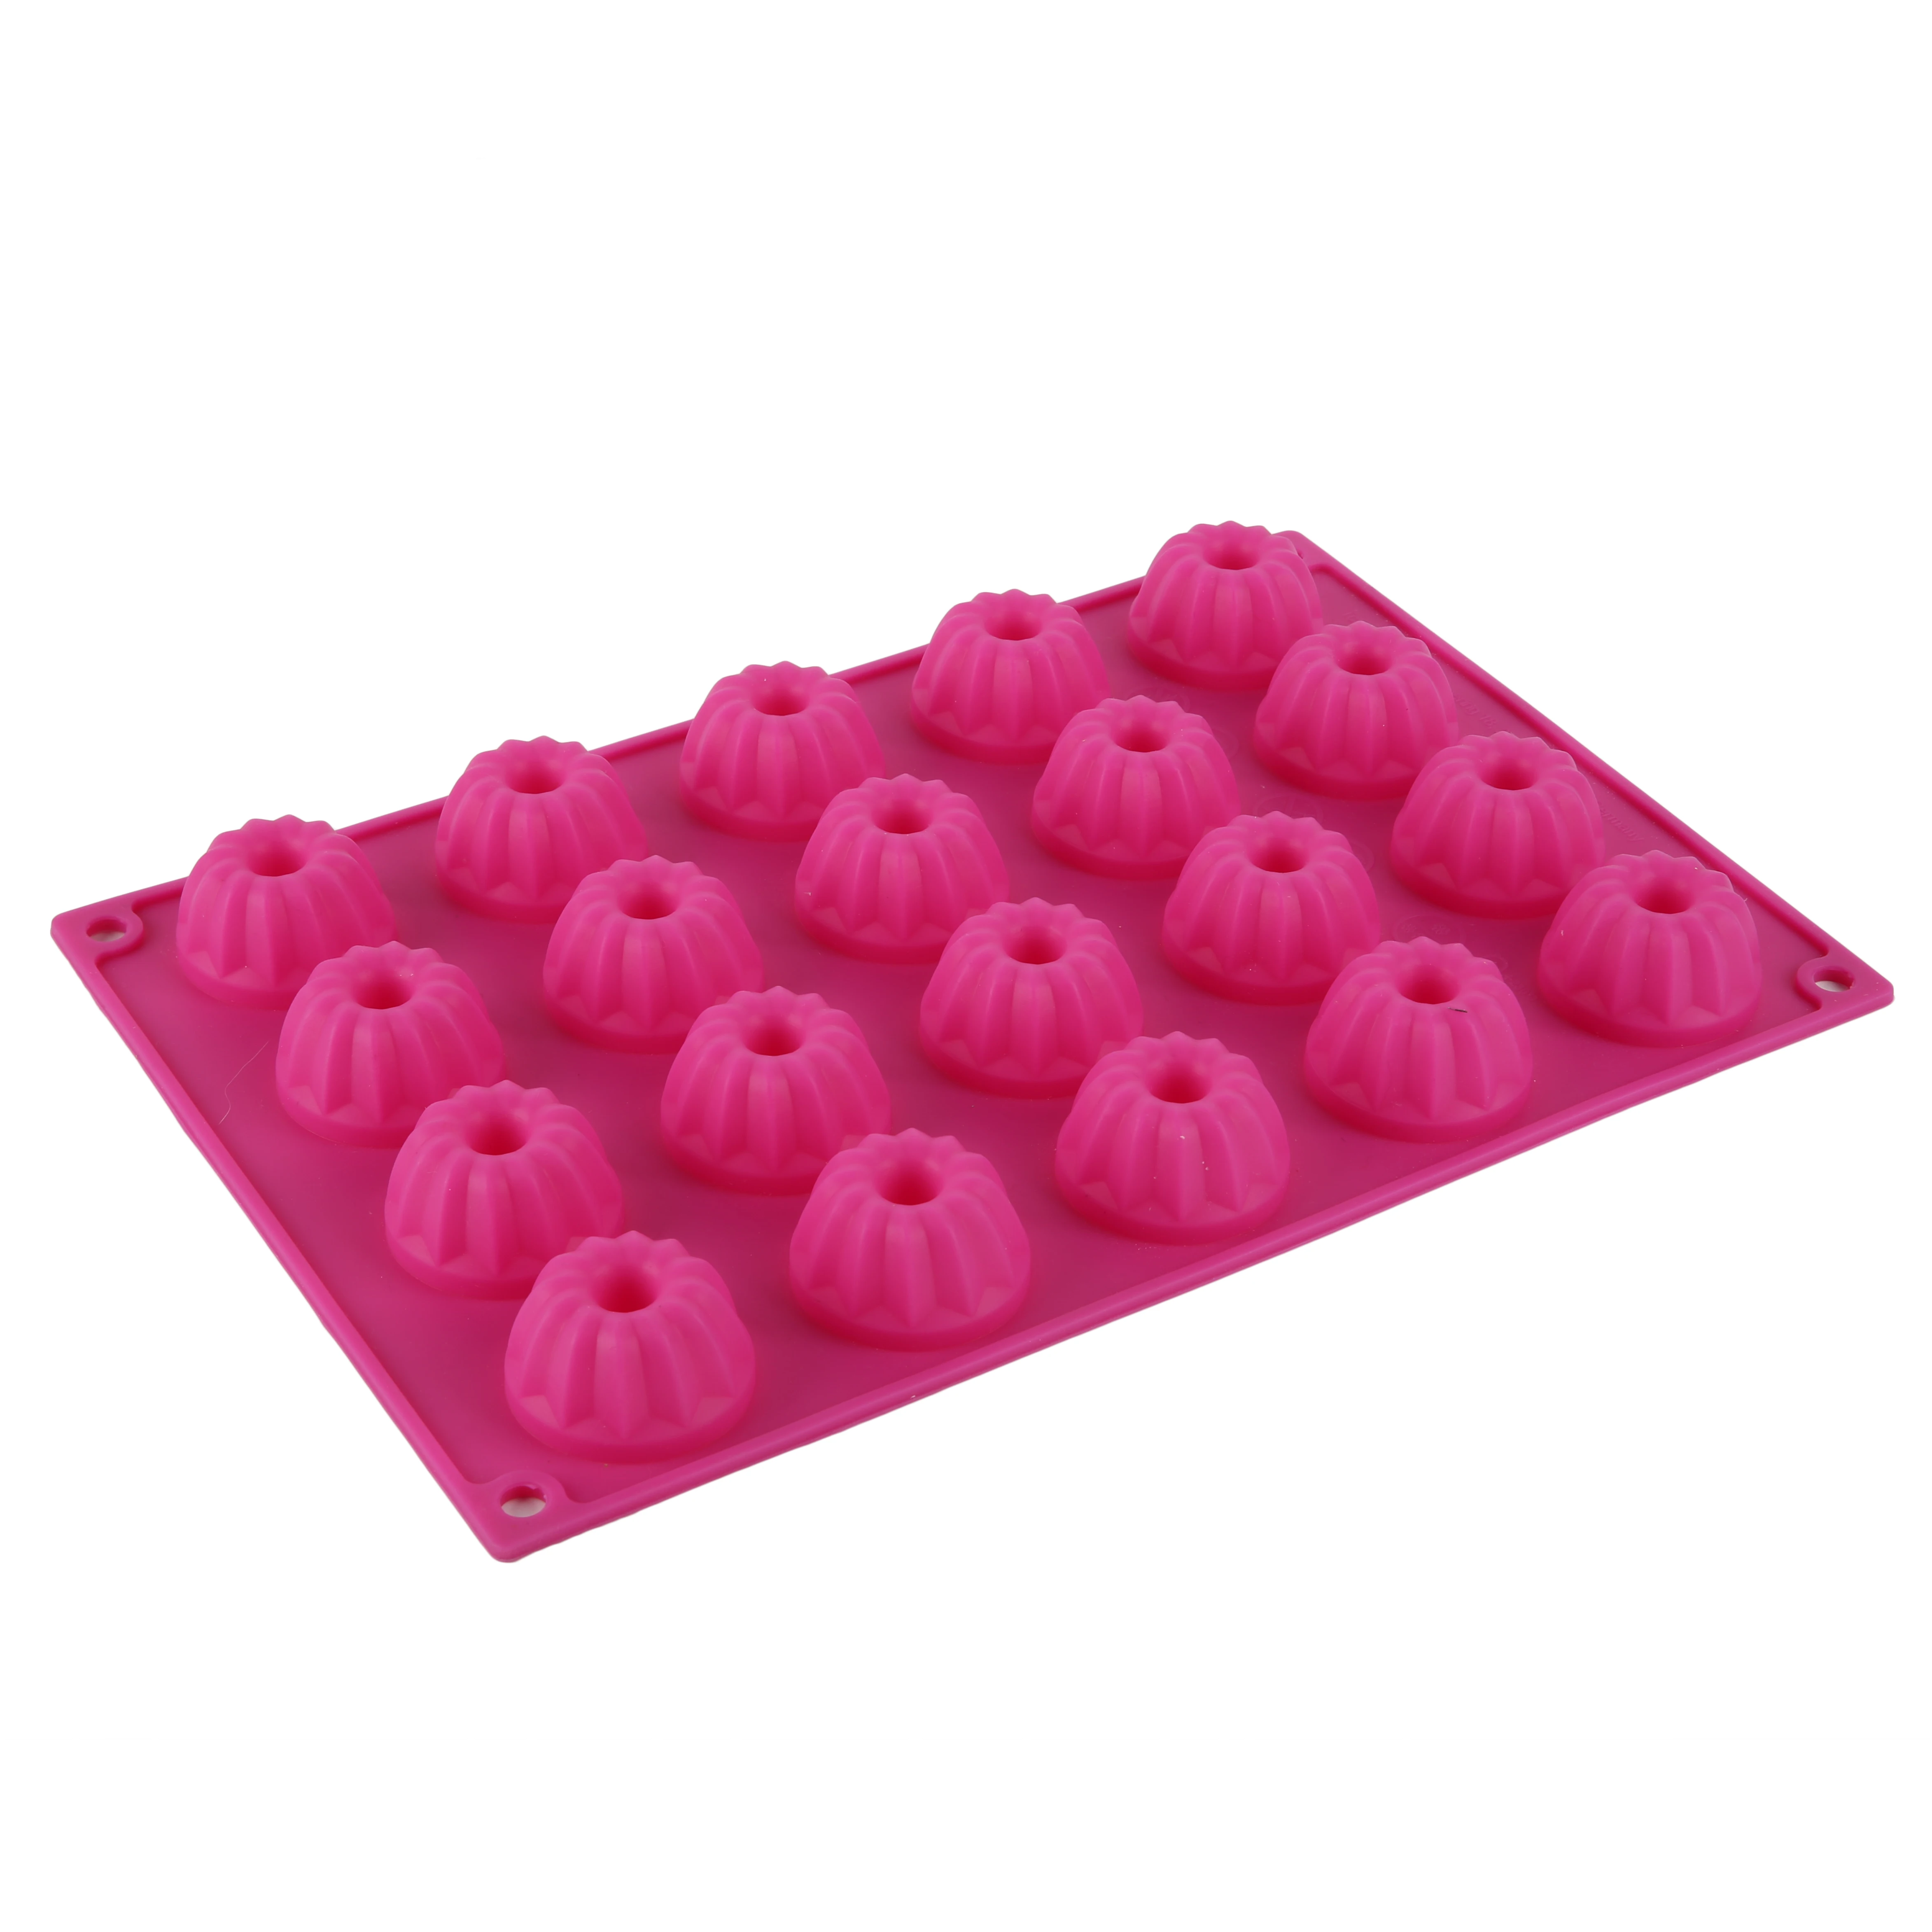 

New Lovely Design Silicone Cake Cookie Fondant Chocolate Mold Baking Tray, According to pantone color